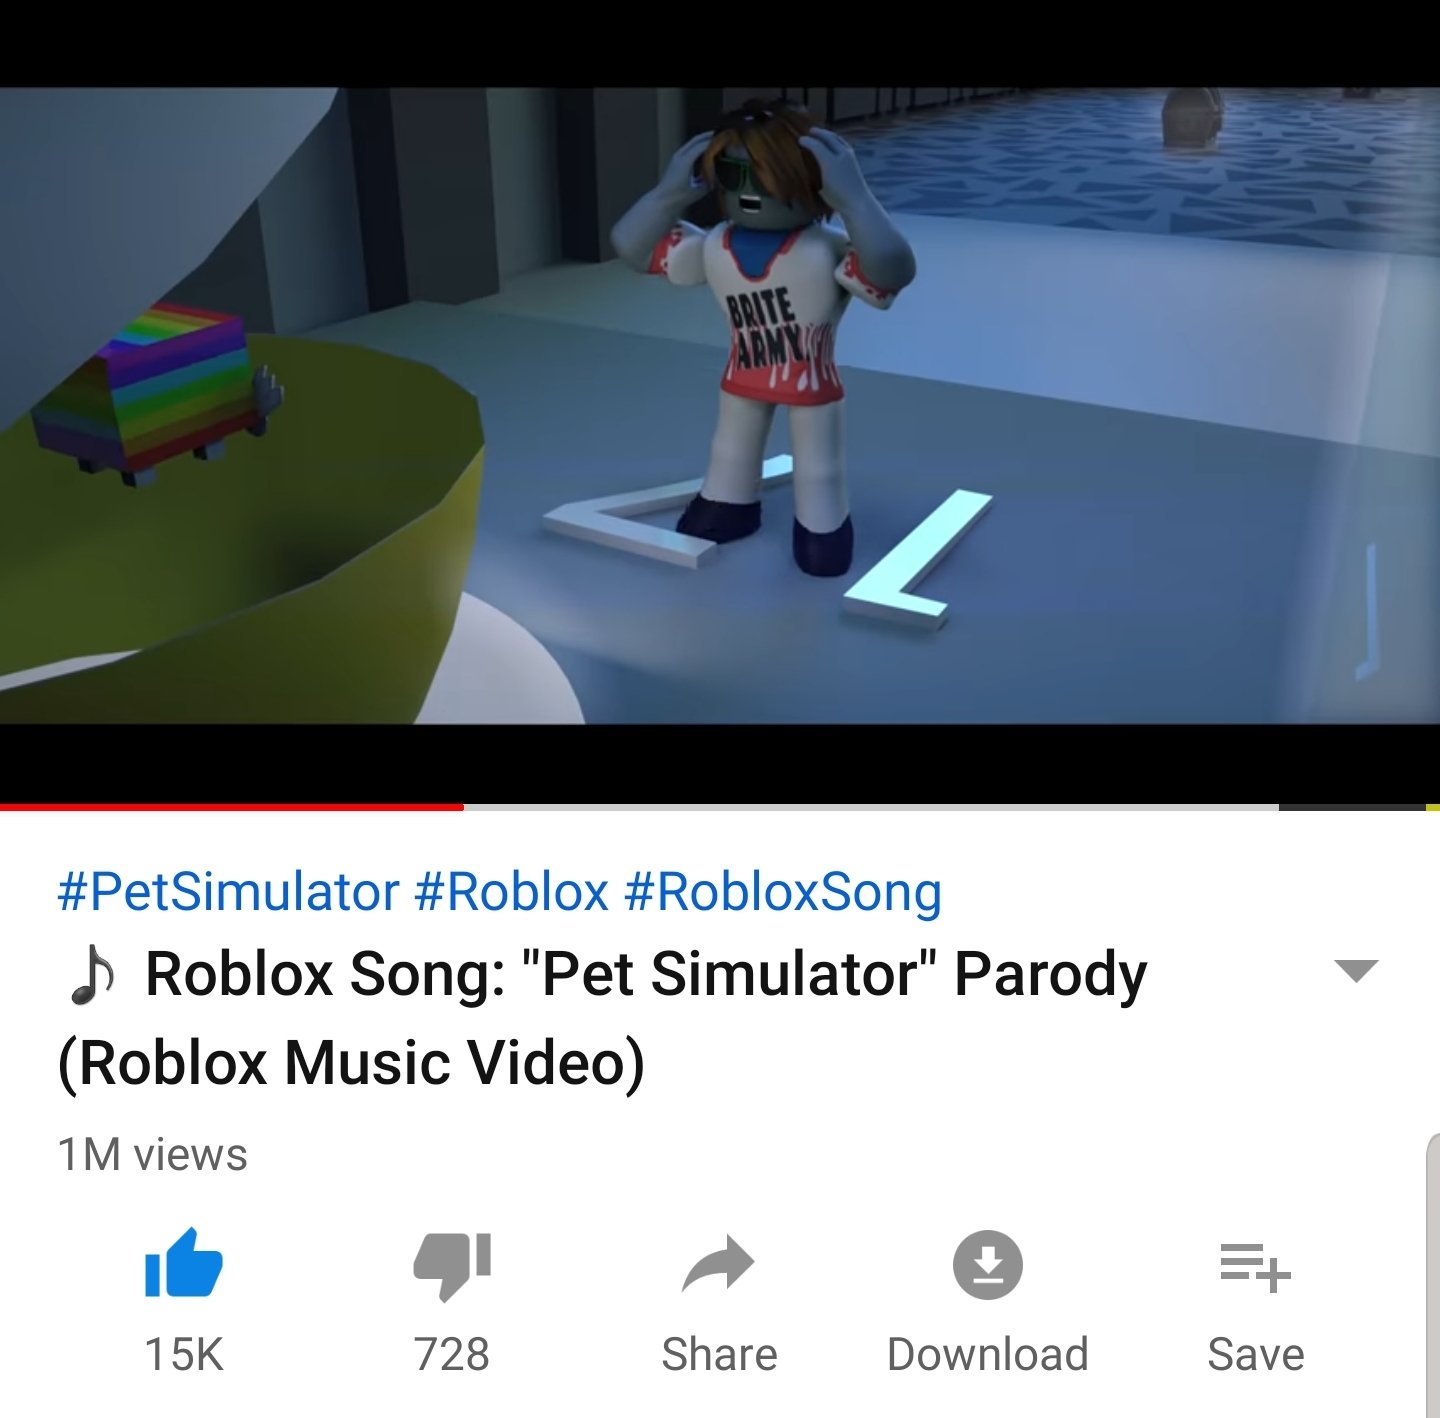 Terabrite Games On Twitter Woah Pet Simulator Is Officially Our Second Roblox Video To Hit 1 Million Views And We Passed 700k Subs In One Day You Brites Brighten Our Life - roblox pet simulator songs